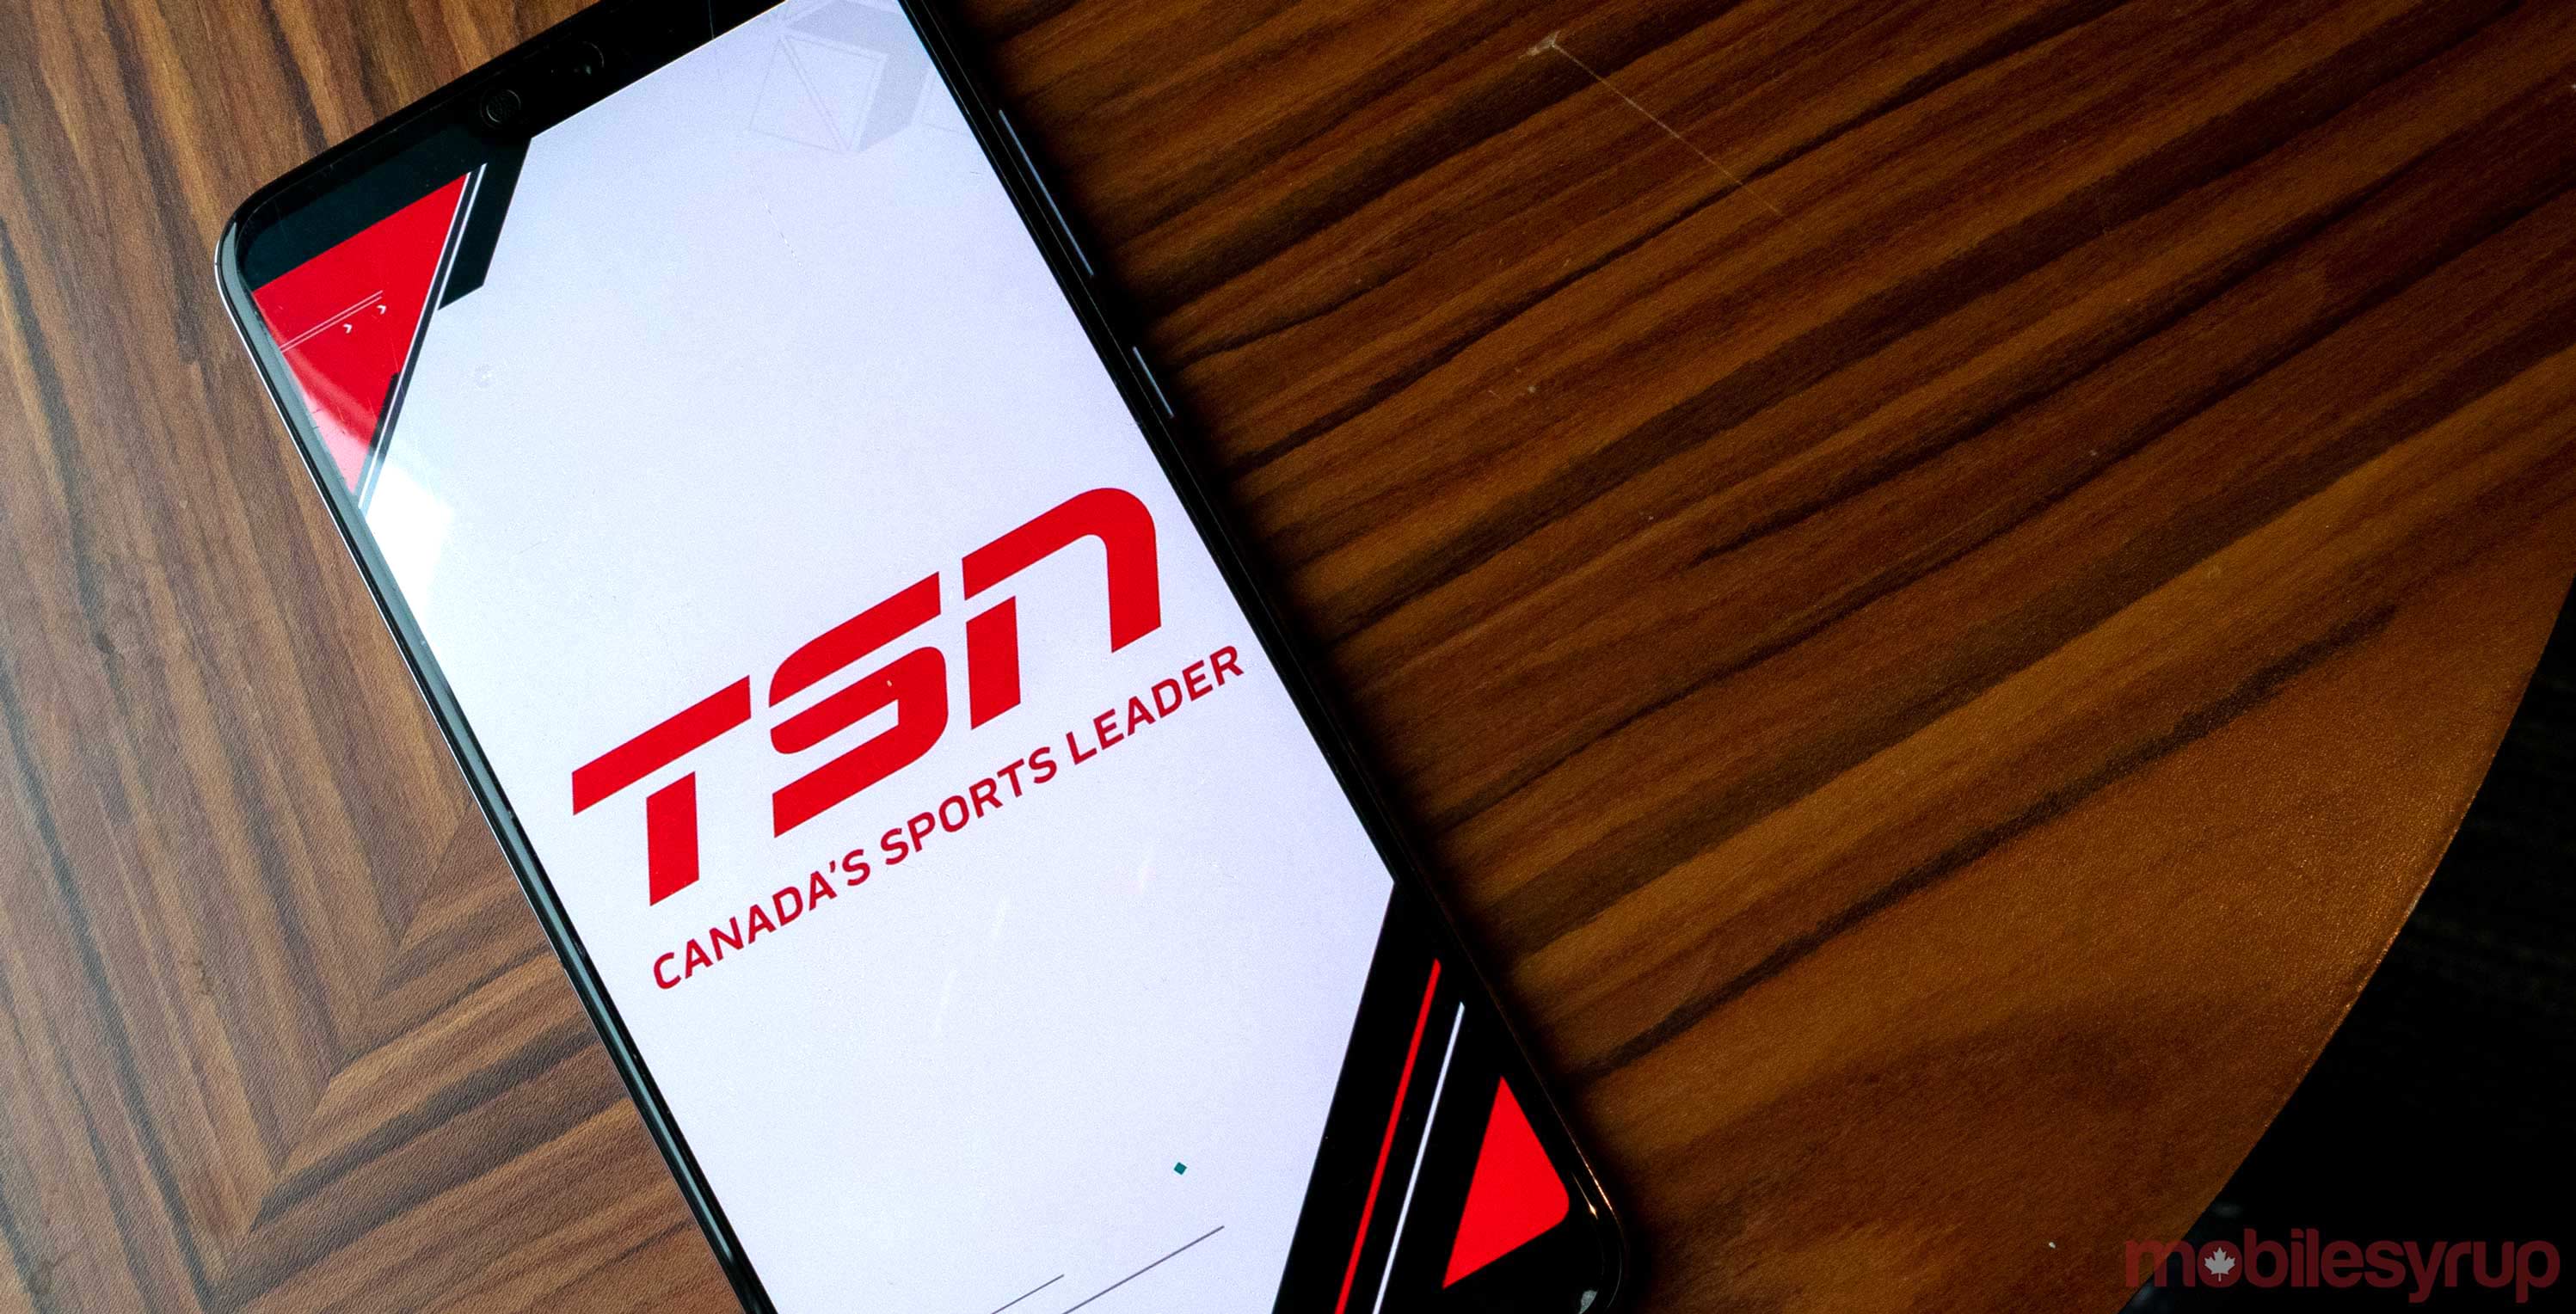 TSN Direct now offered in $4.99 day pass, reduced monthly subscription